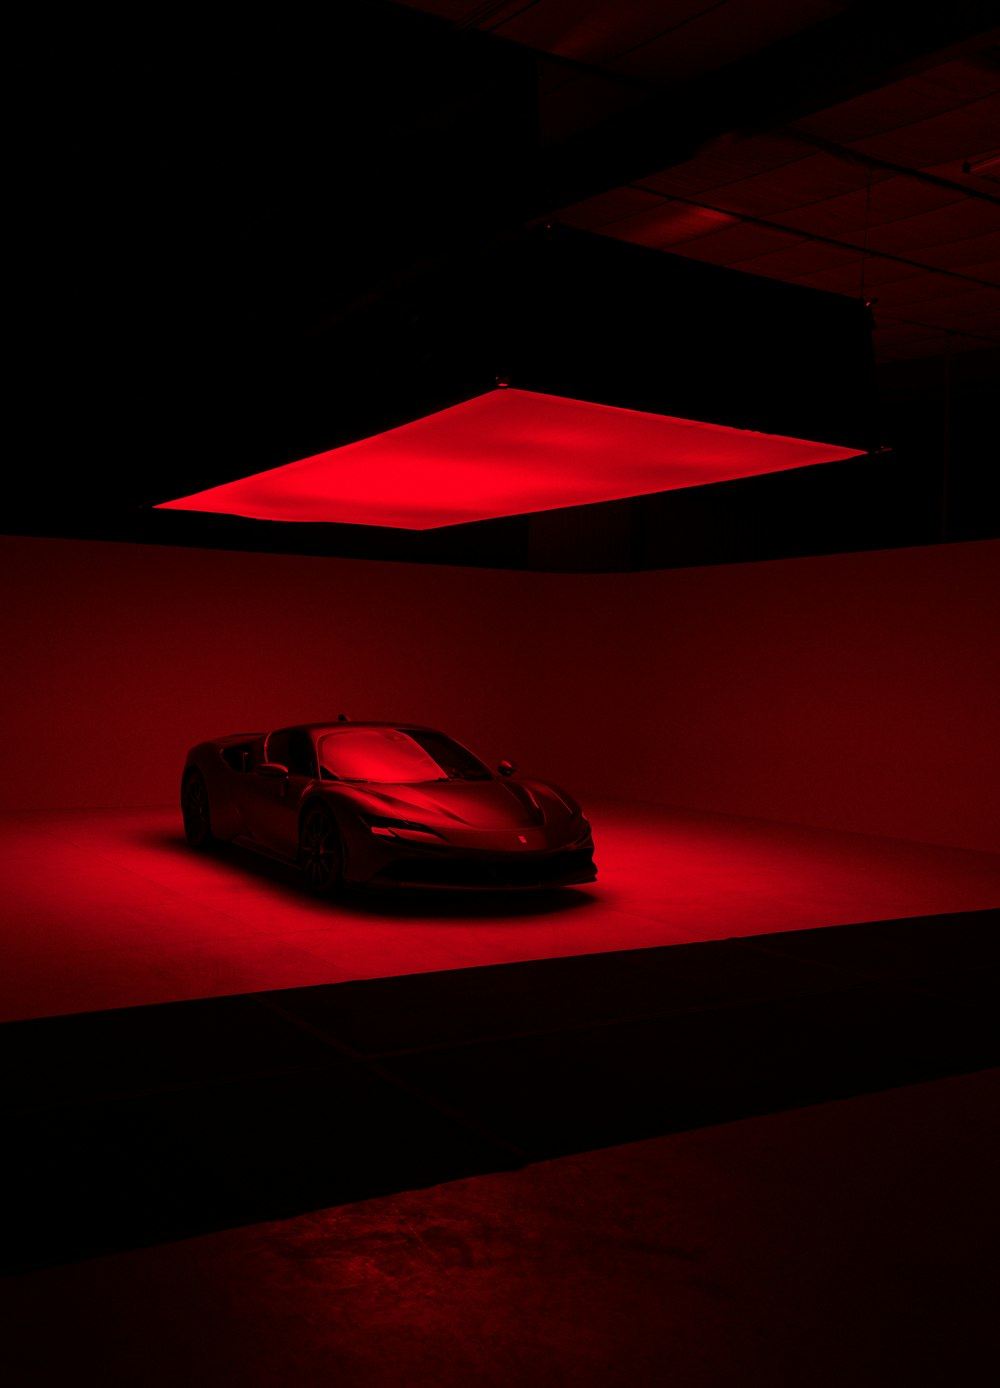 a car in a dark room with red lighting